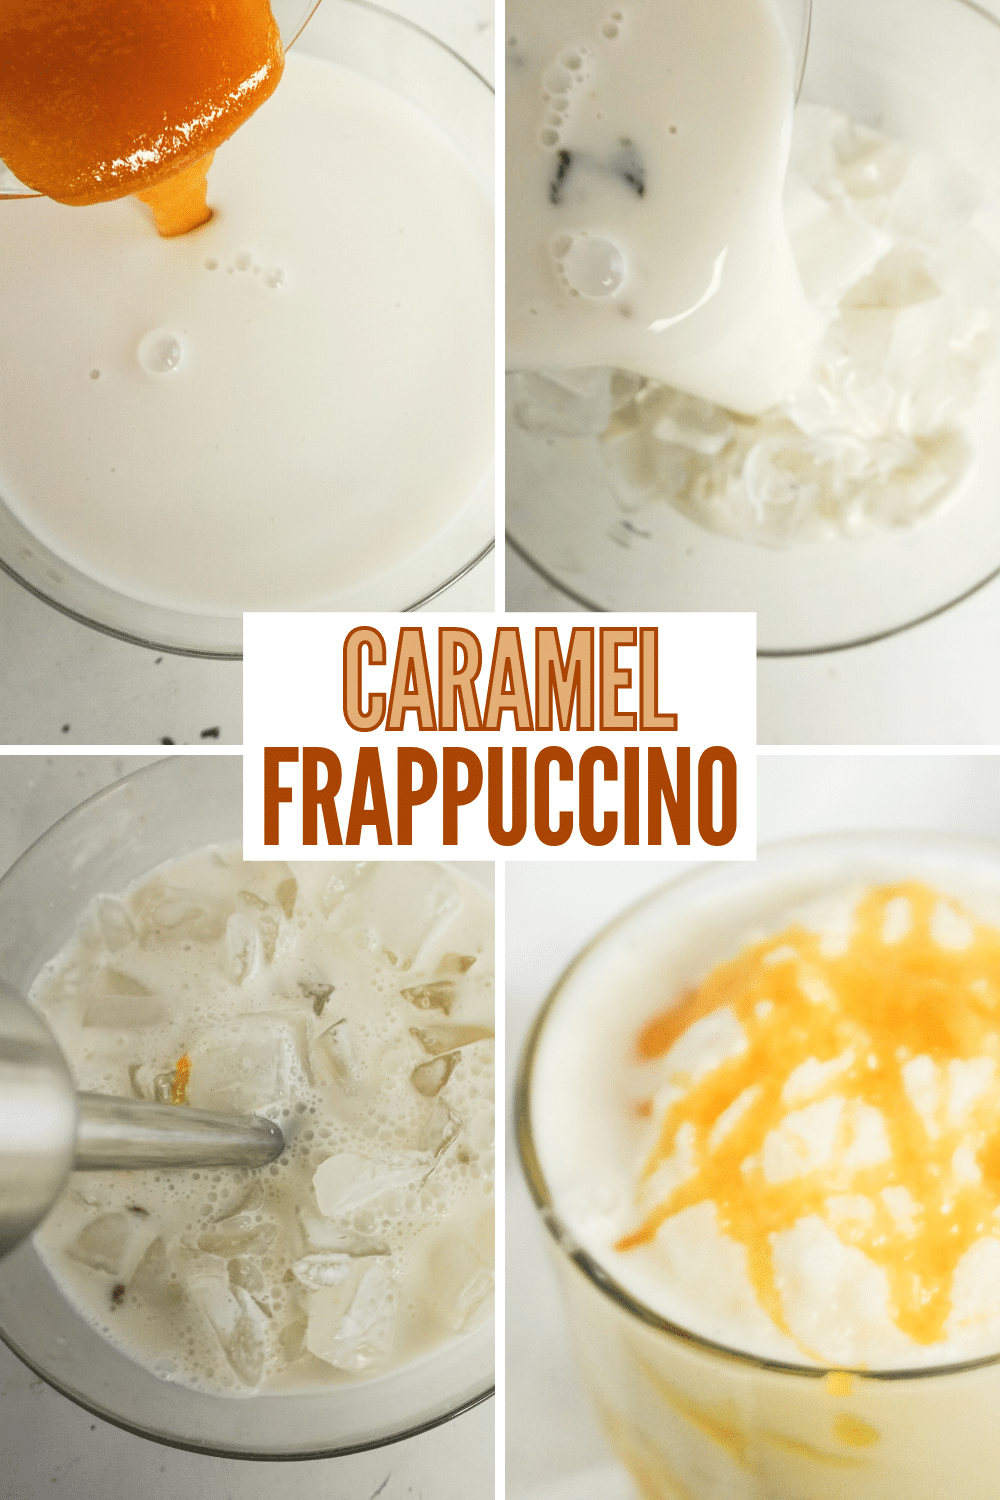 If you’re looking for a copycat recipe for the famous Starbucks caramel frappuccino, you’ve found it. This drink hits all the right spots! #starbuckscopycatrecipe #caramelfrappuccino #copycatrecipe #caramel #frappucino via @wondermomwannab